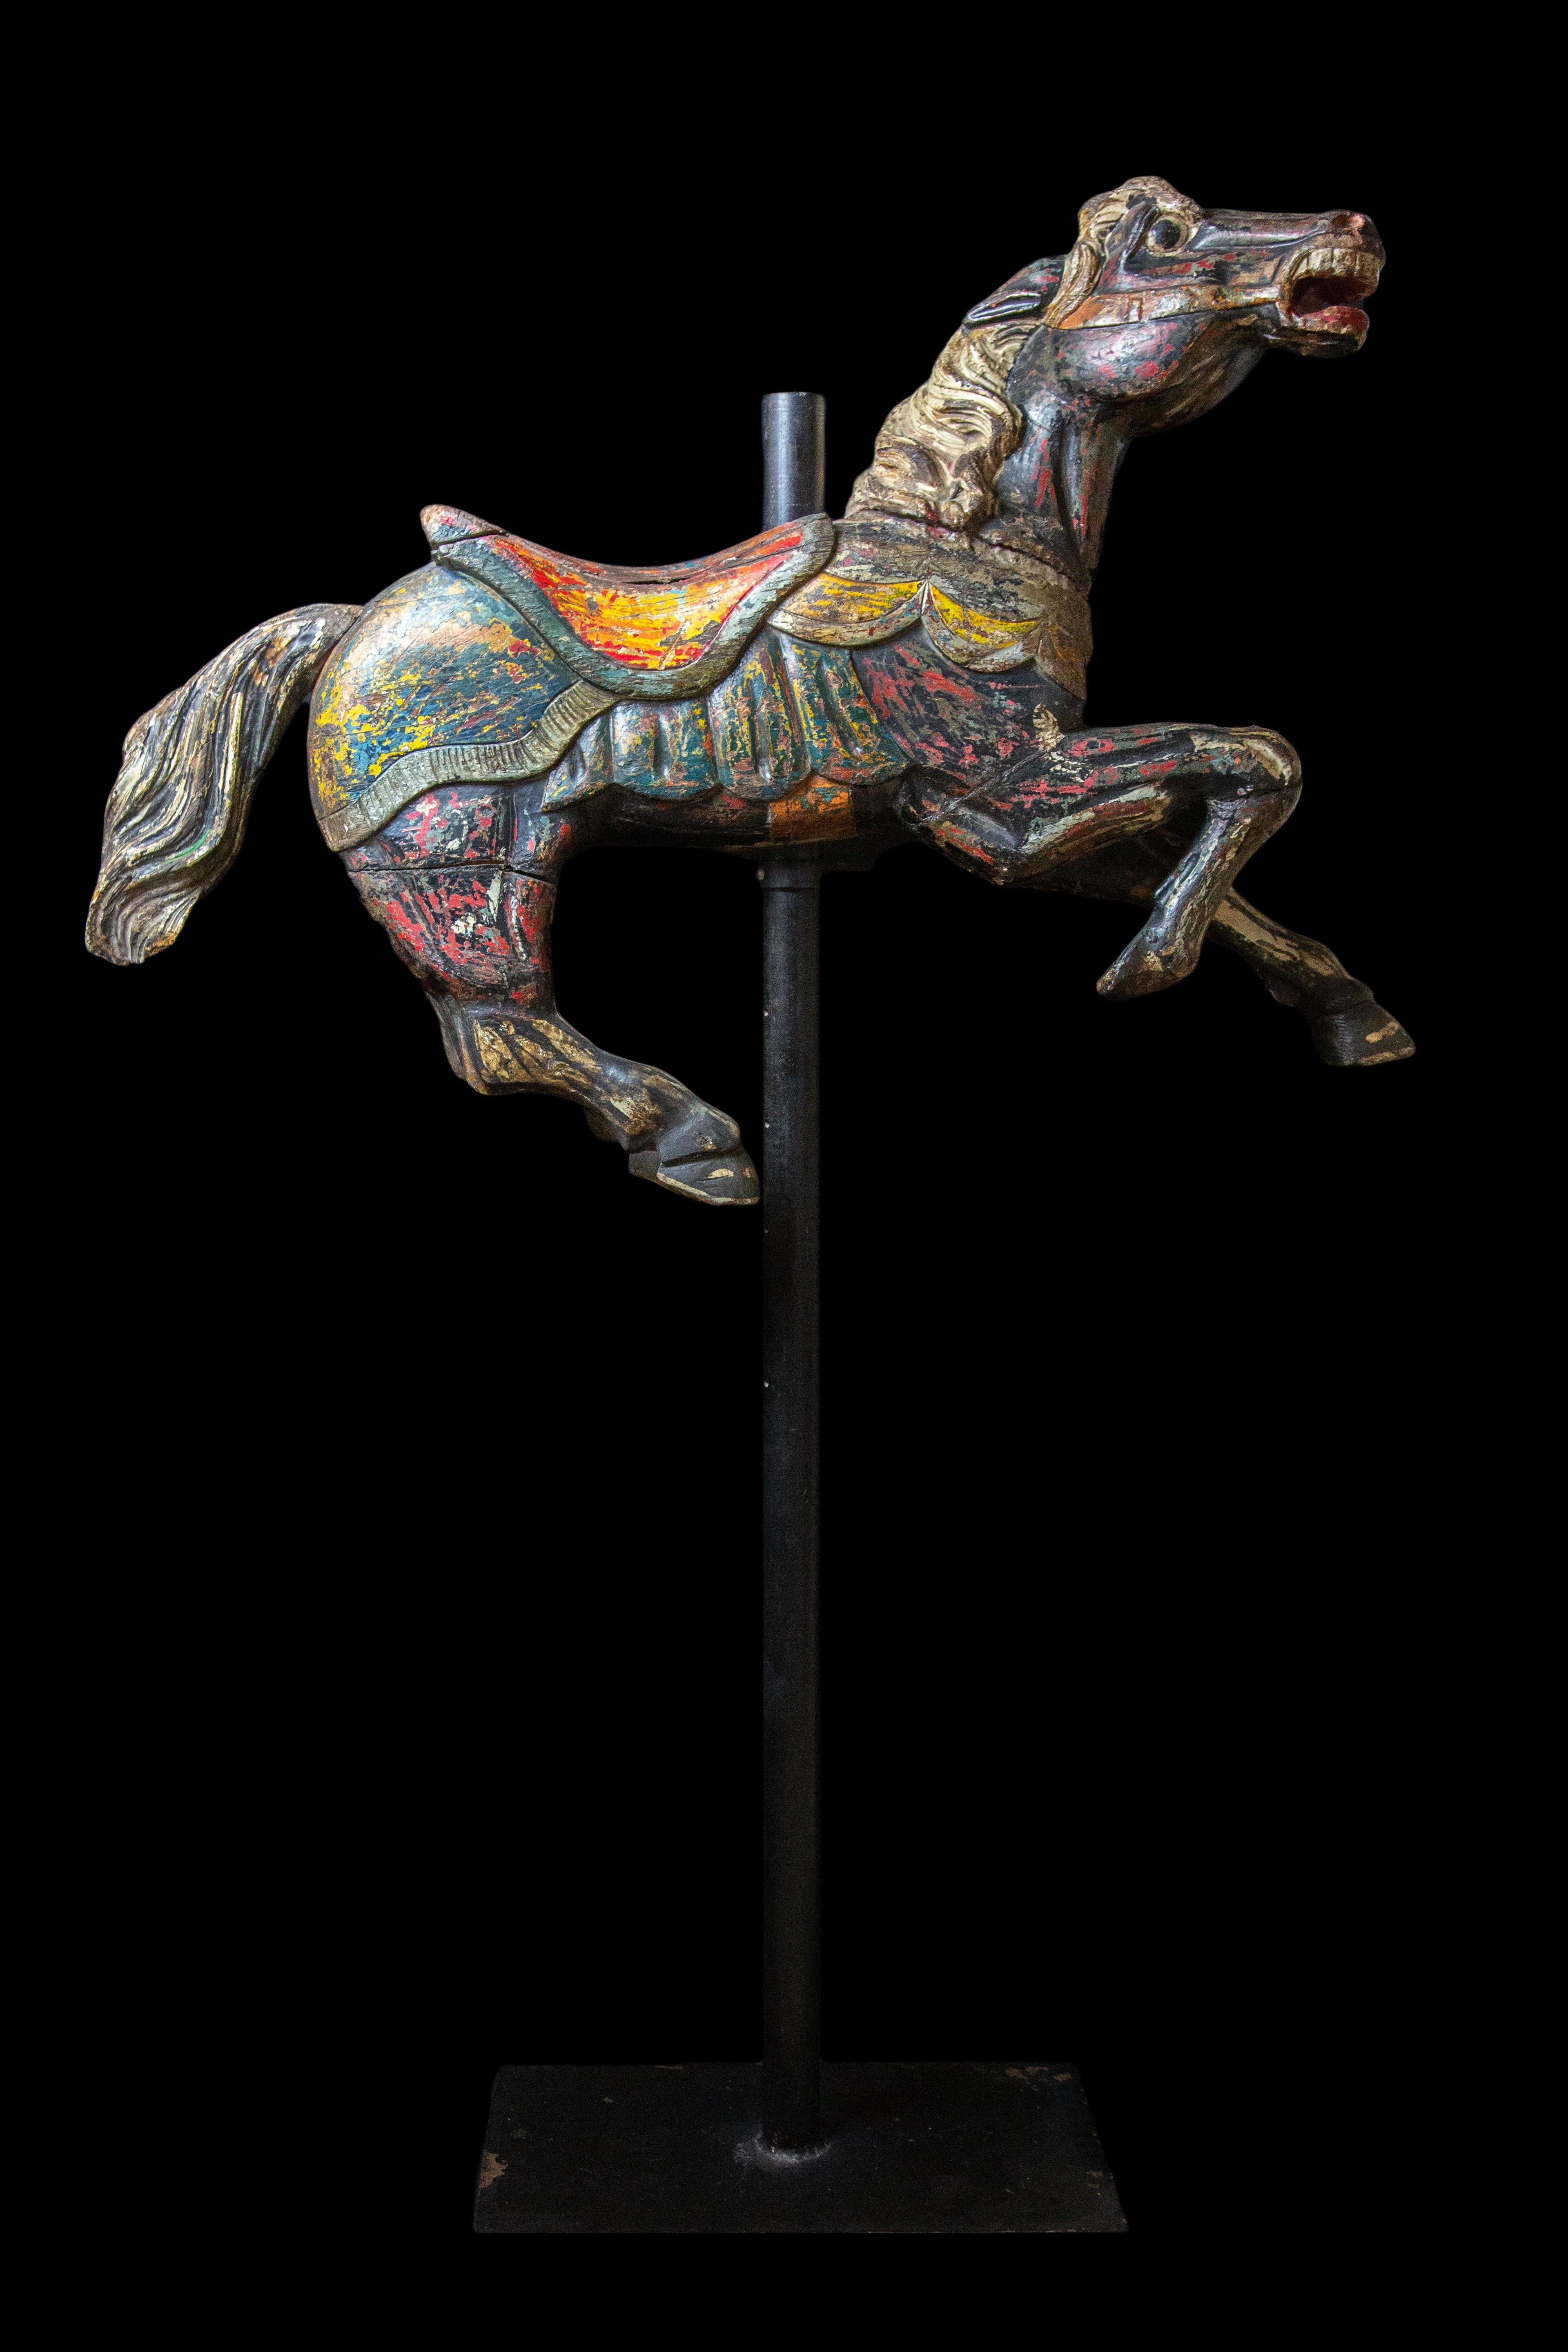 Americana Folk-Art carved and paint decorated wood childs carousel horse:

Mounted on metal pole base

Measures: 13